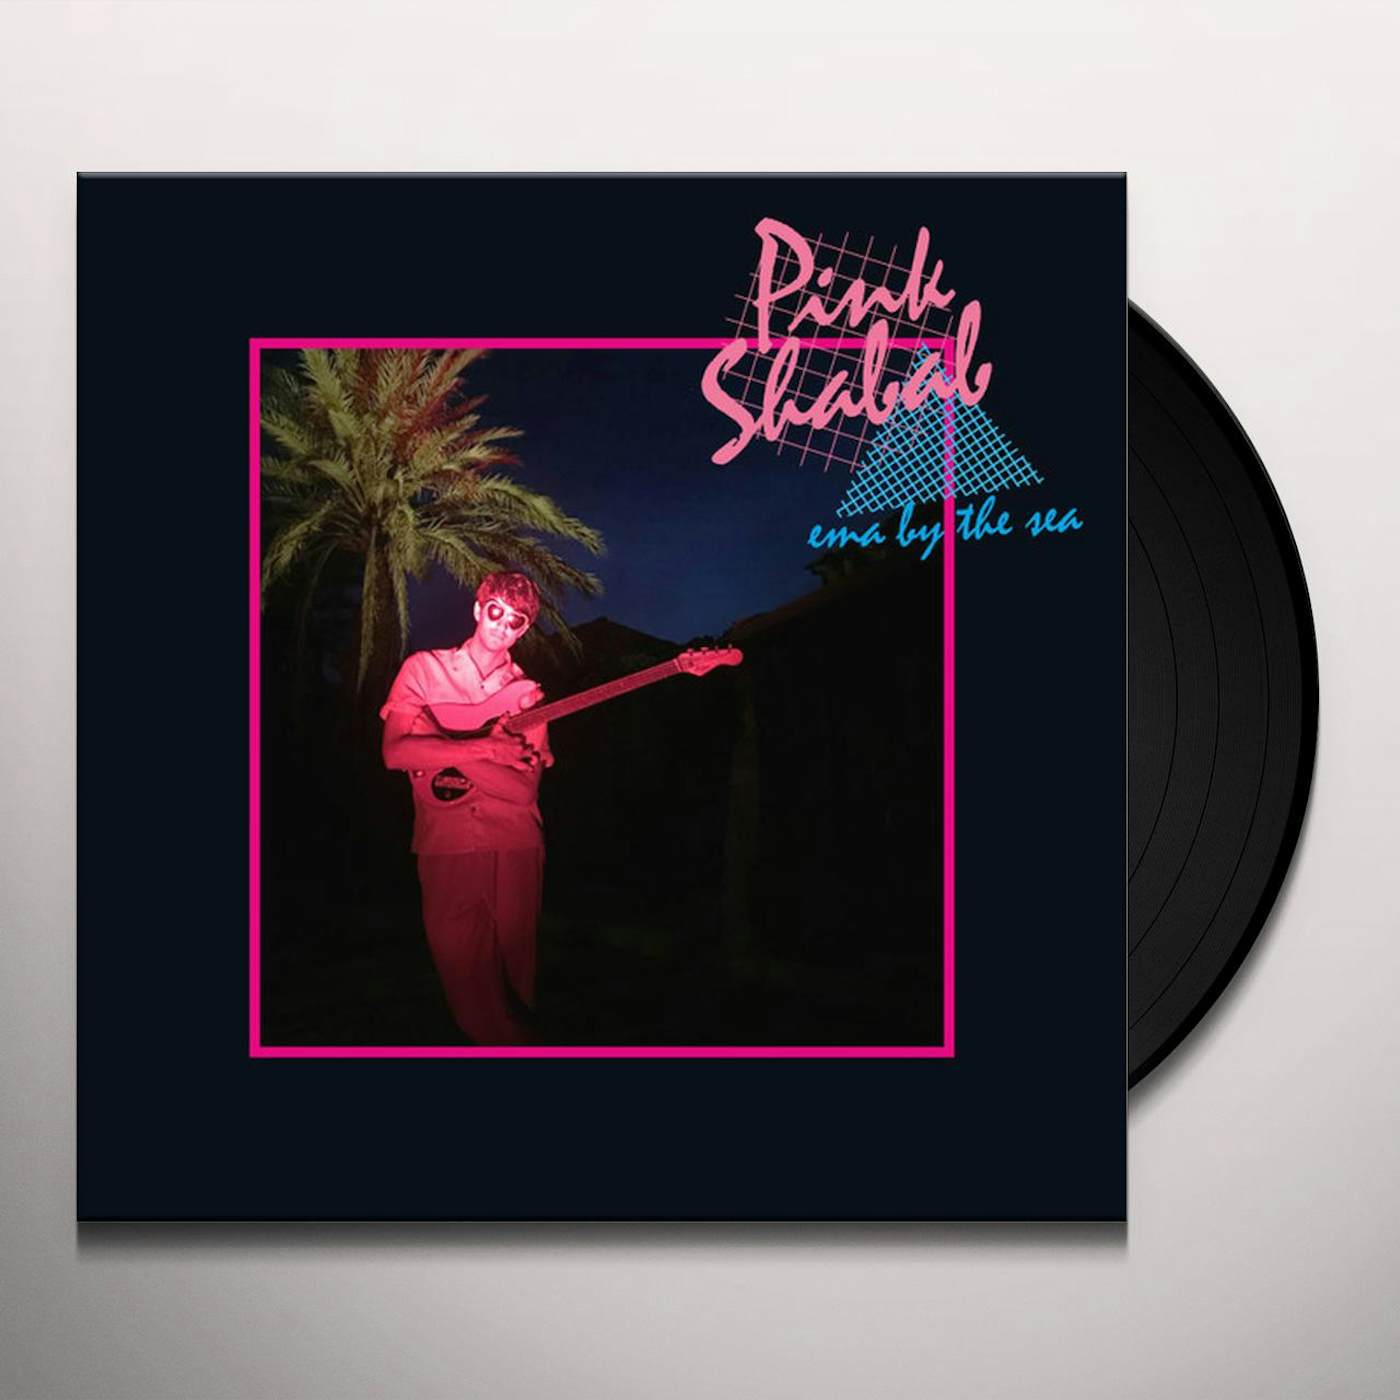 Pink Shabab Ema By The Sea Vinyl Record